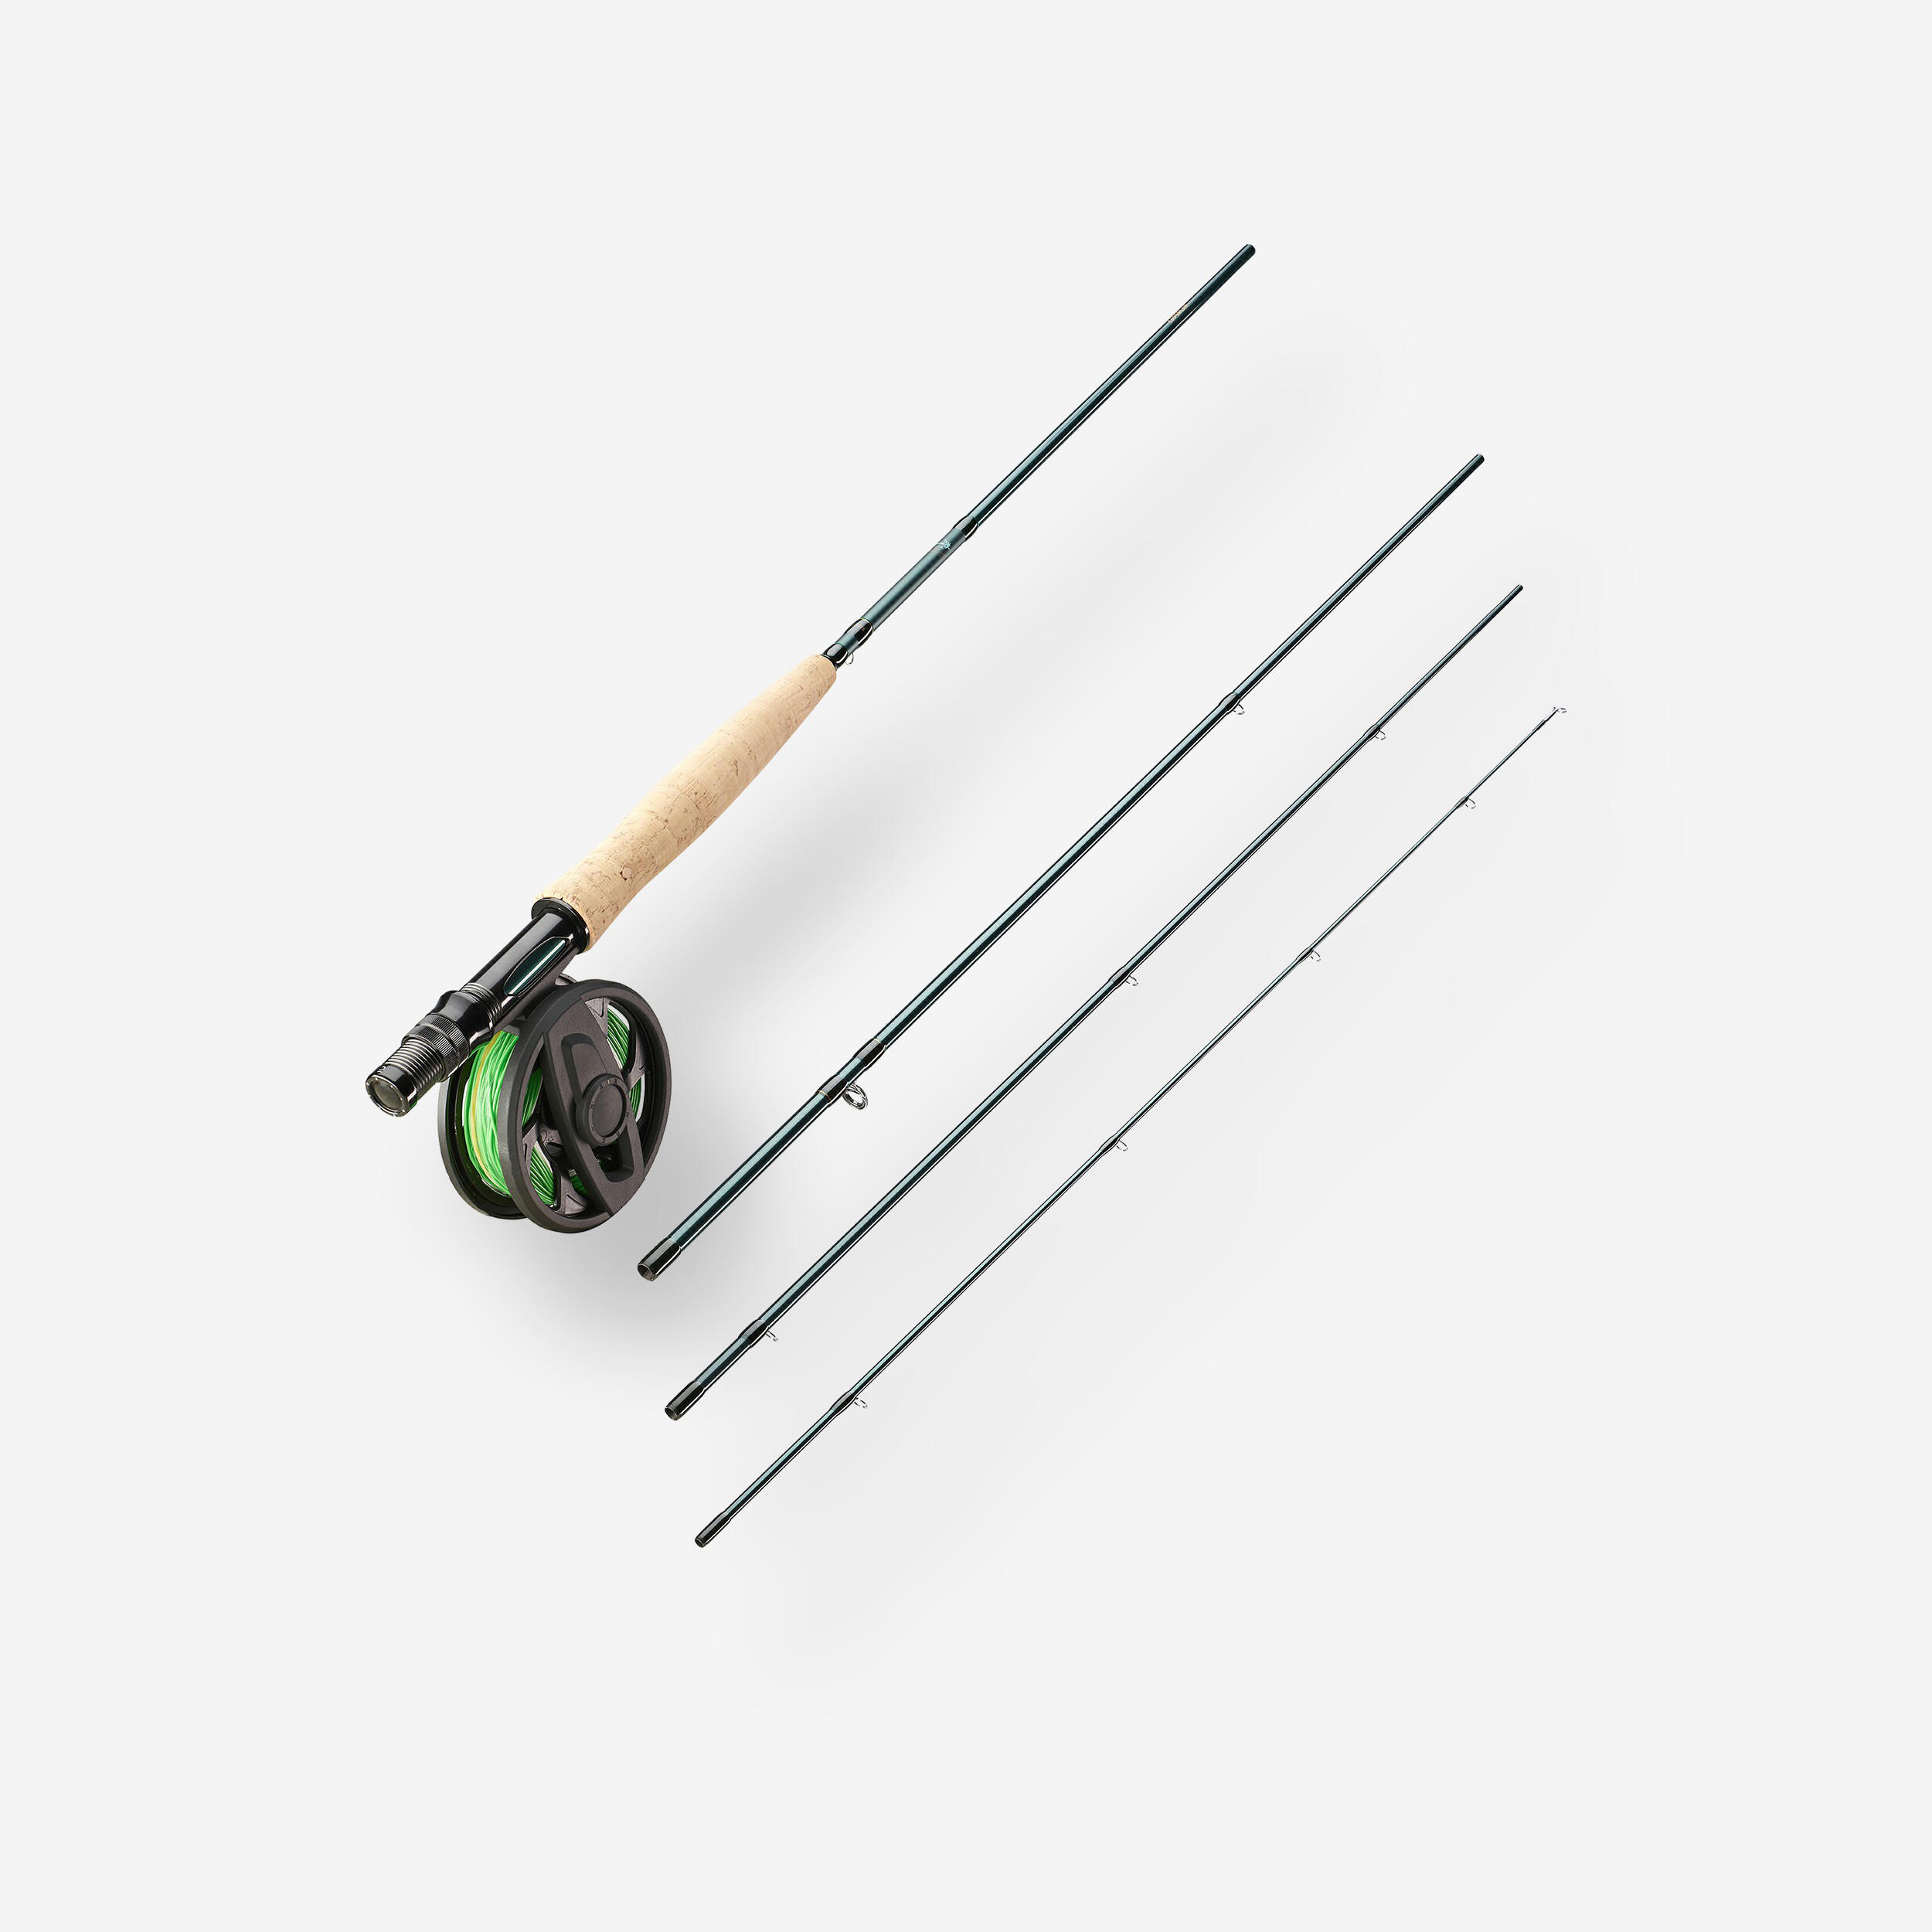 Fly Rod kit Fishing Rod and Reel Combo Saltwater Fresh Water-12 FT